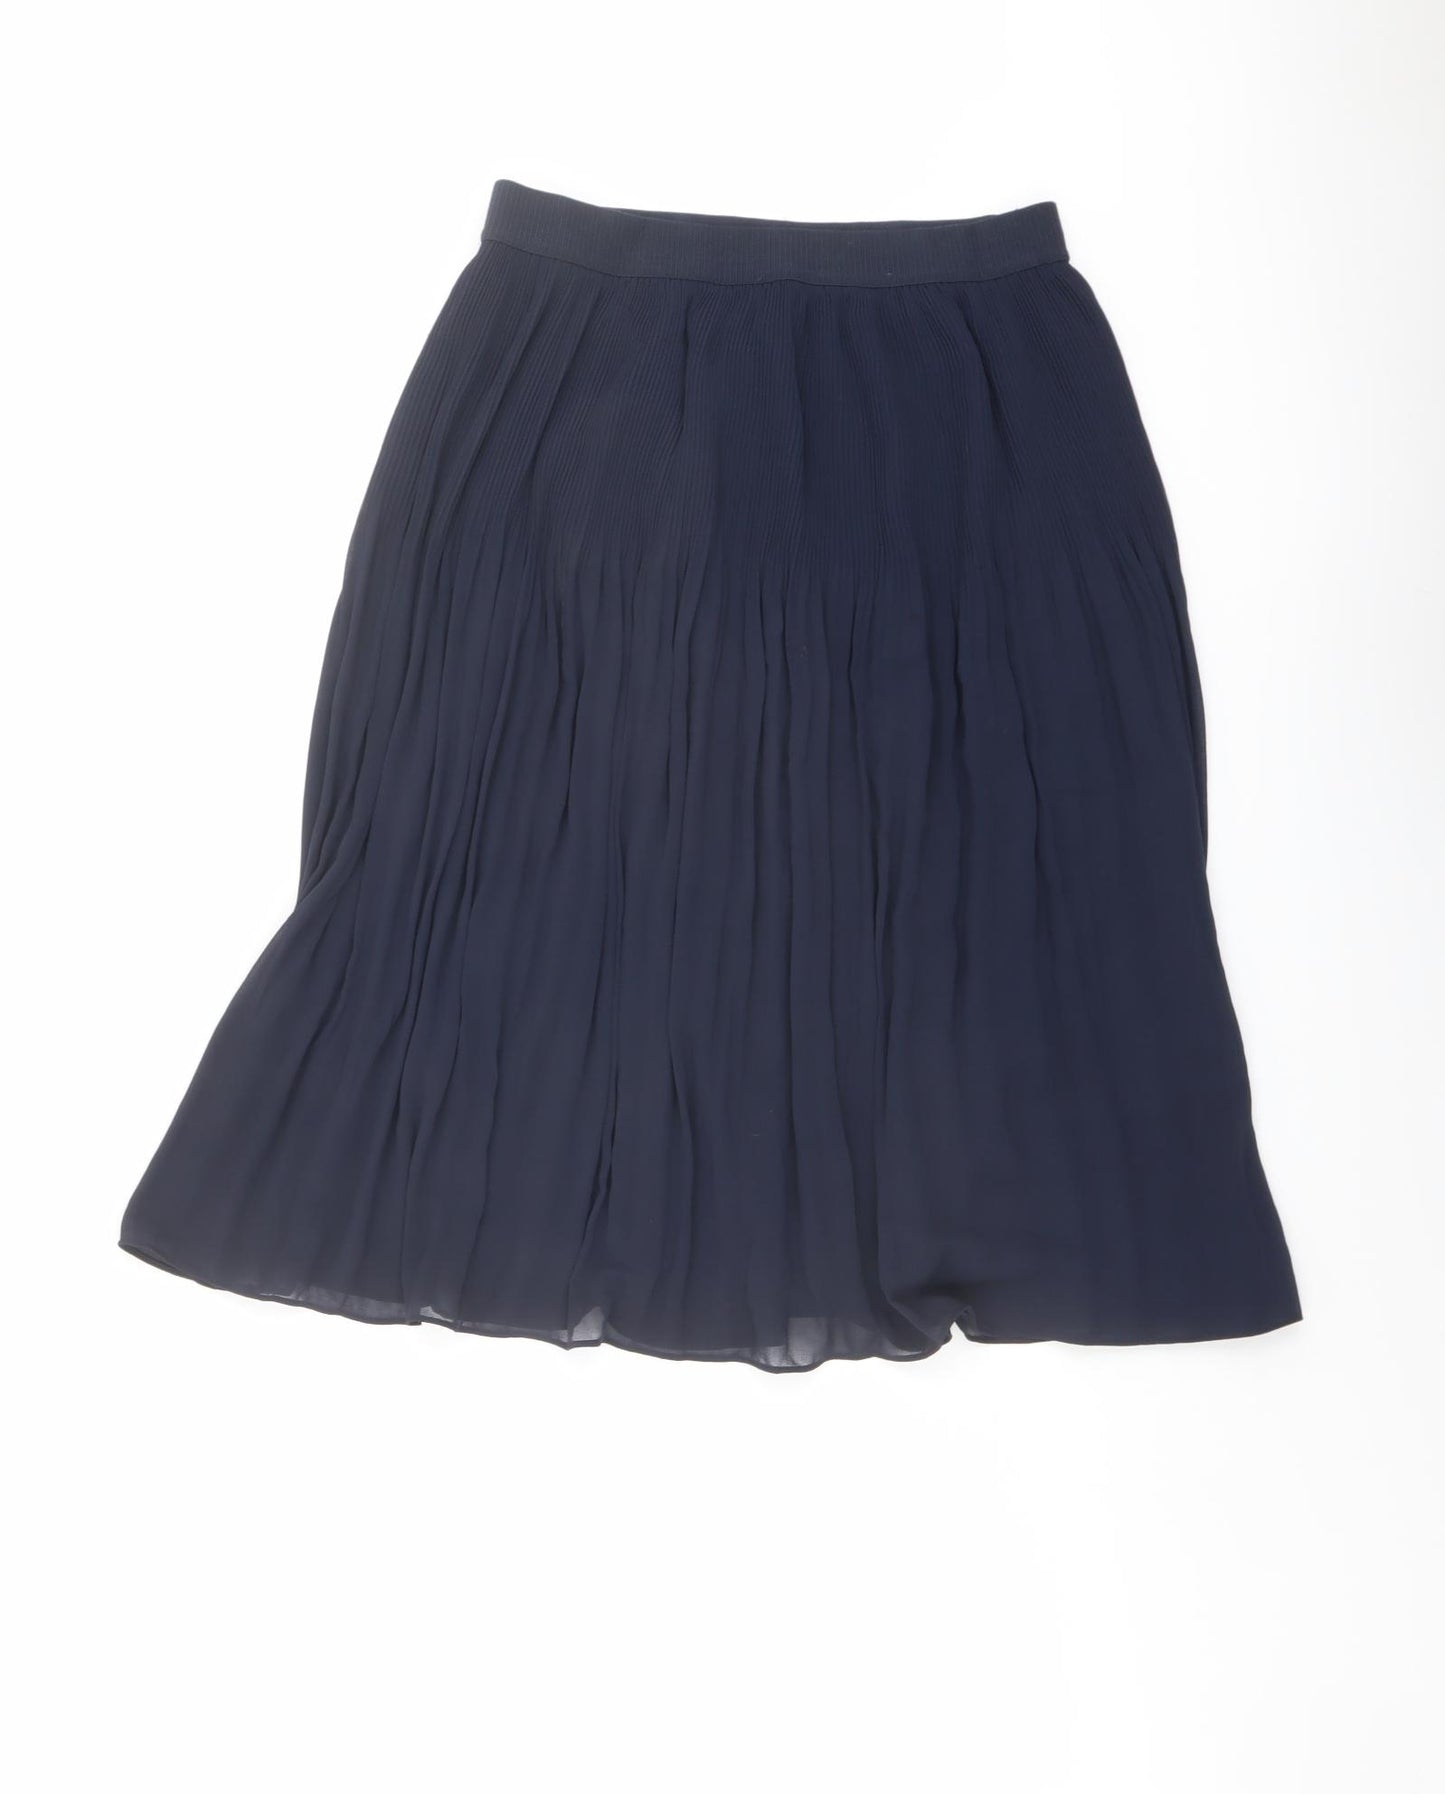 H&M Womens Blue Polyester Pleated Skirt Size 12